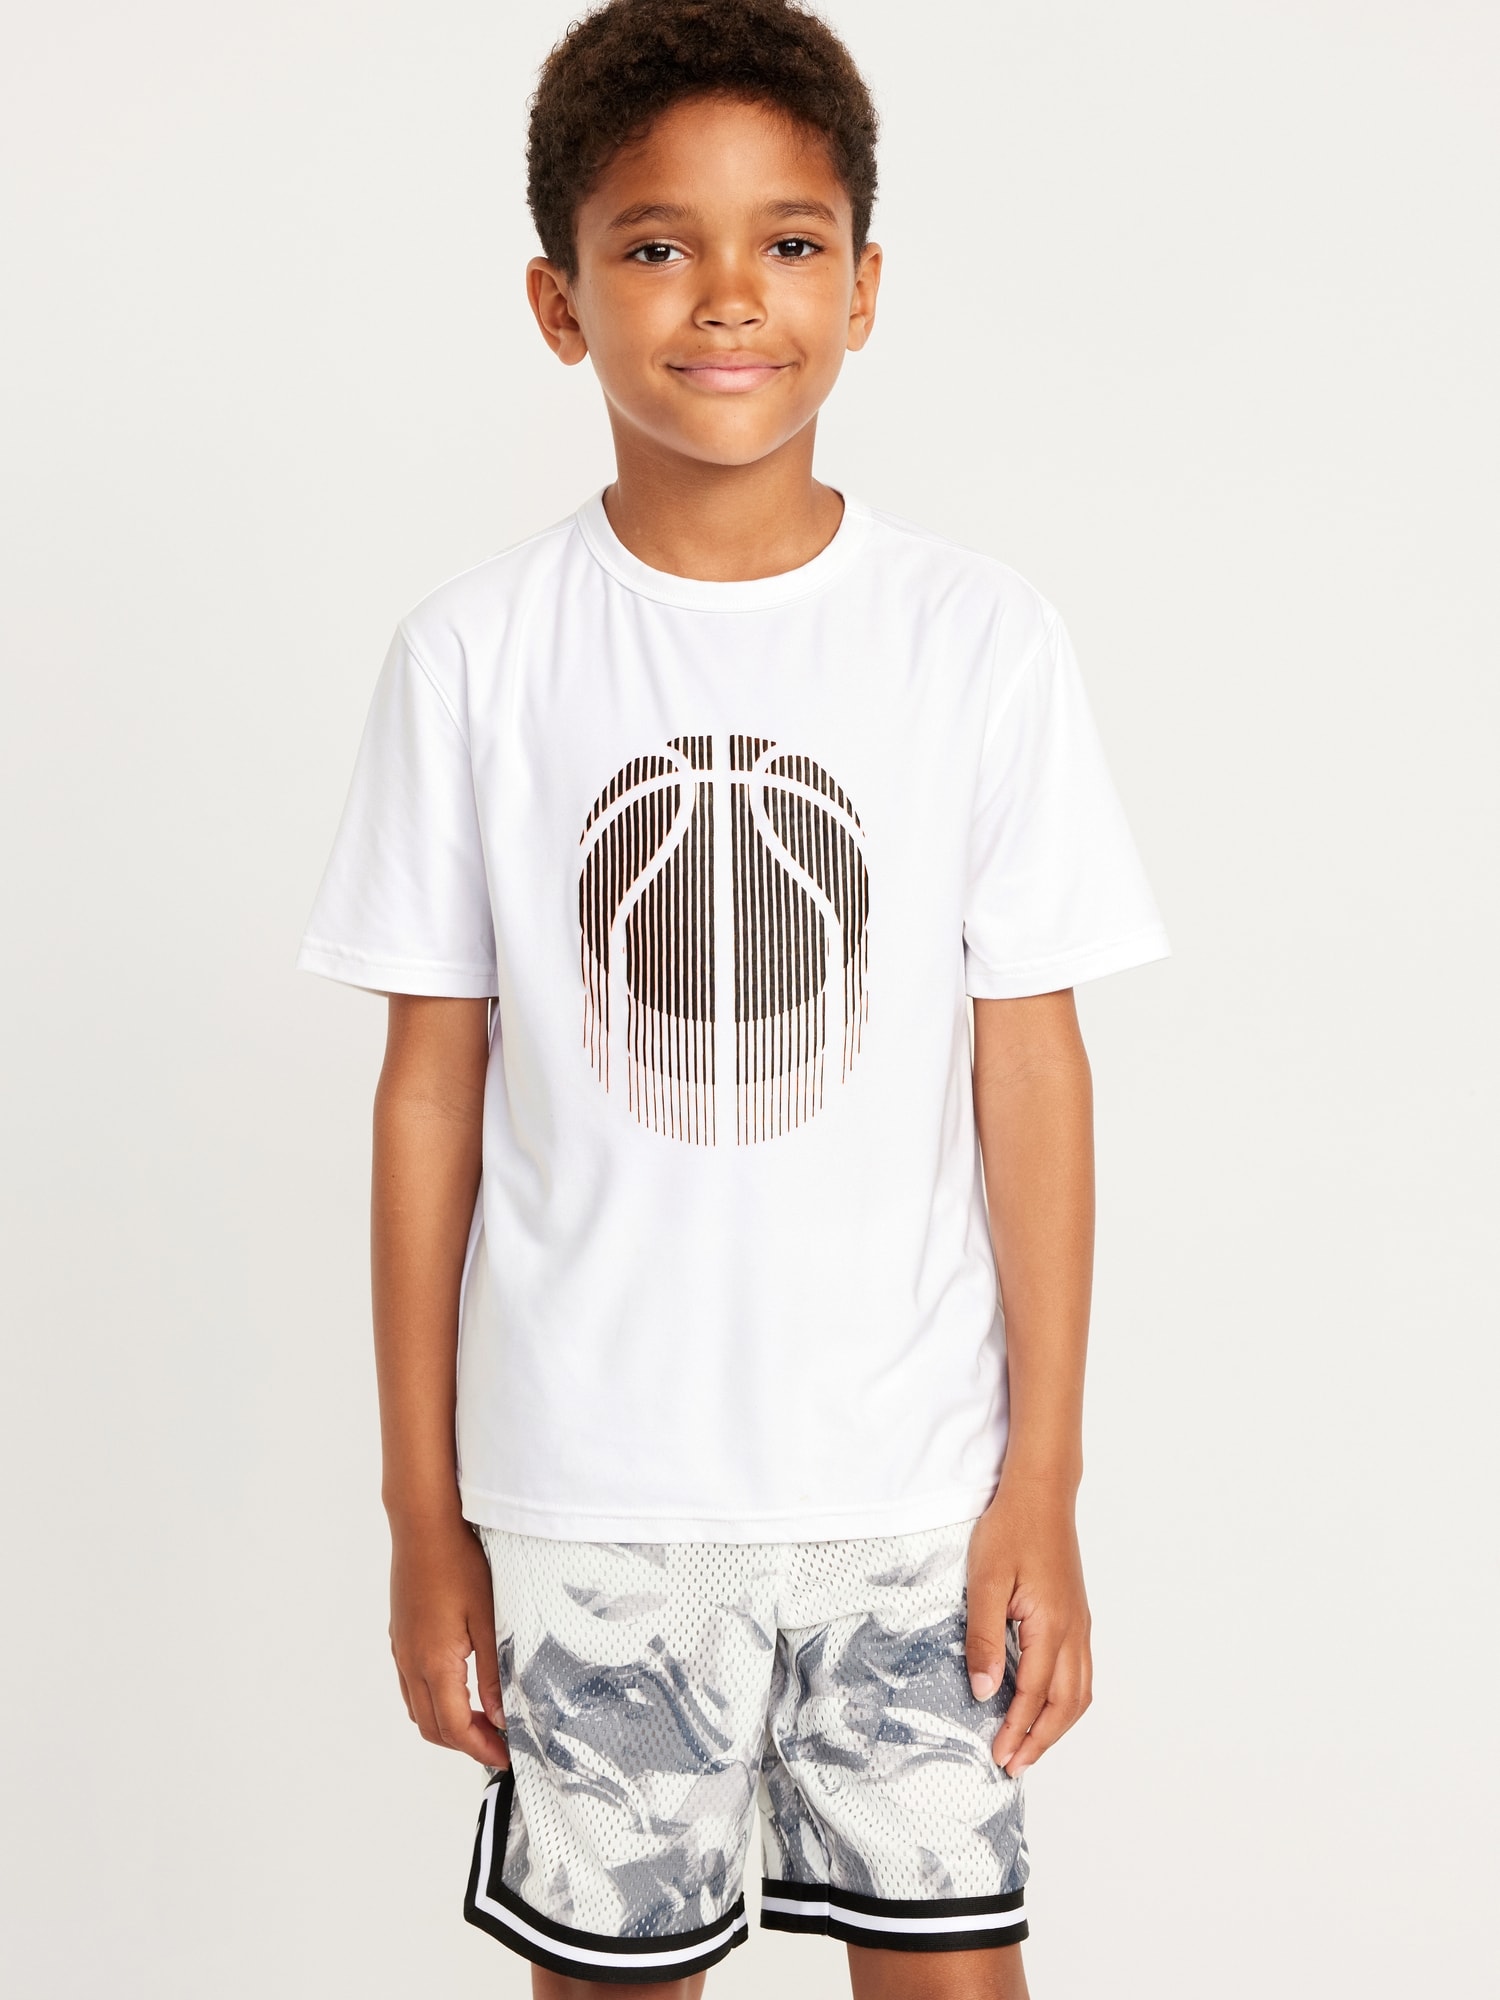 Cloud 94 Soft Graphic Performance T-Shirt for Boys